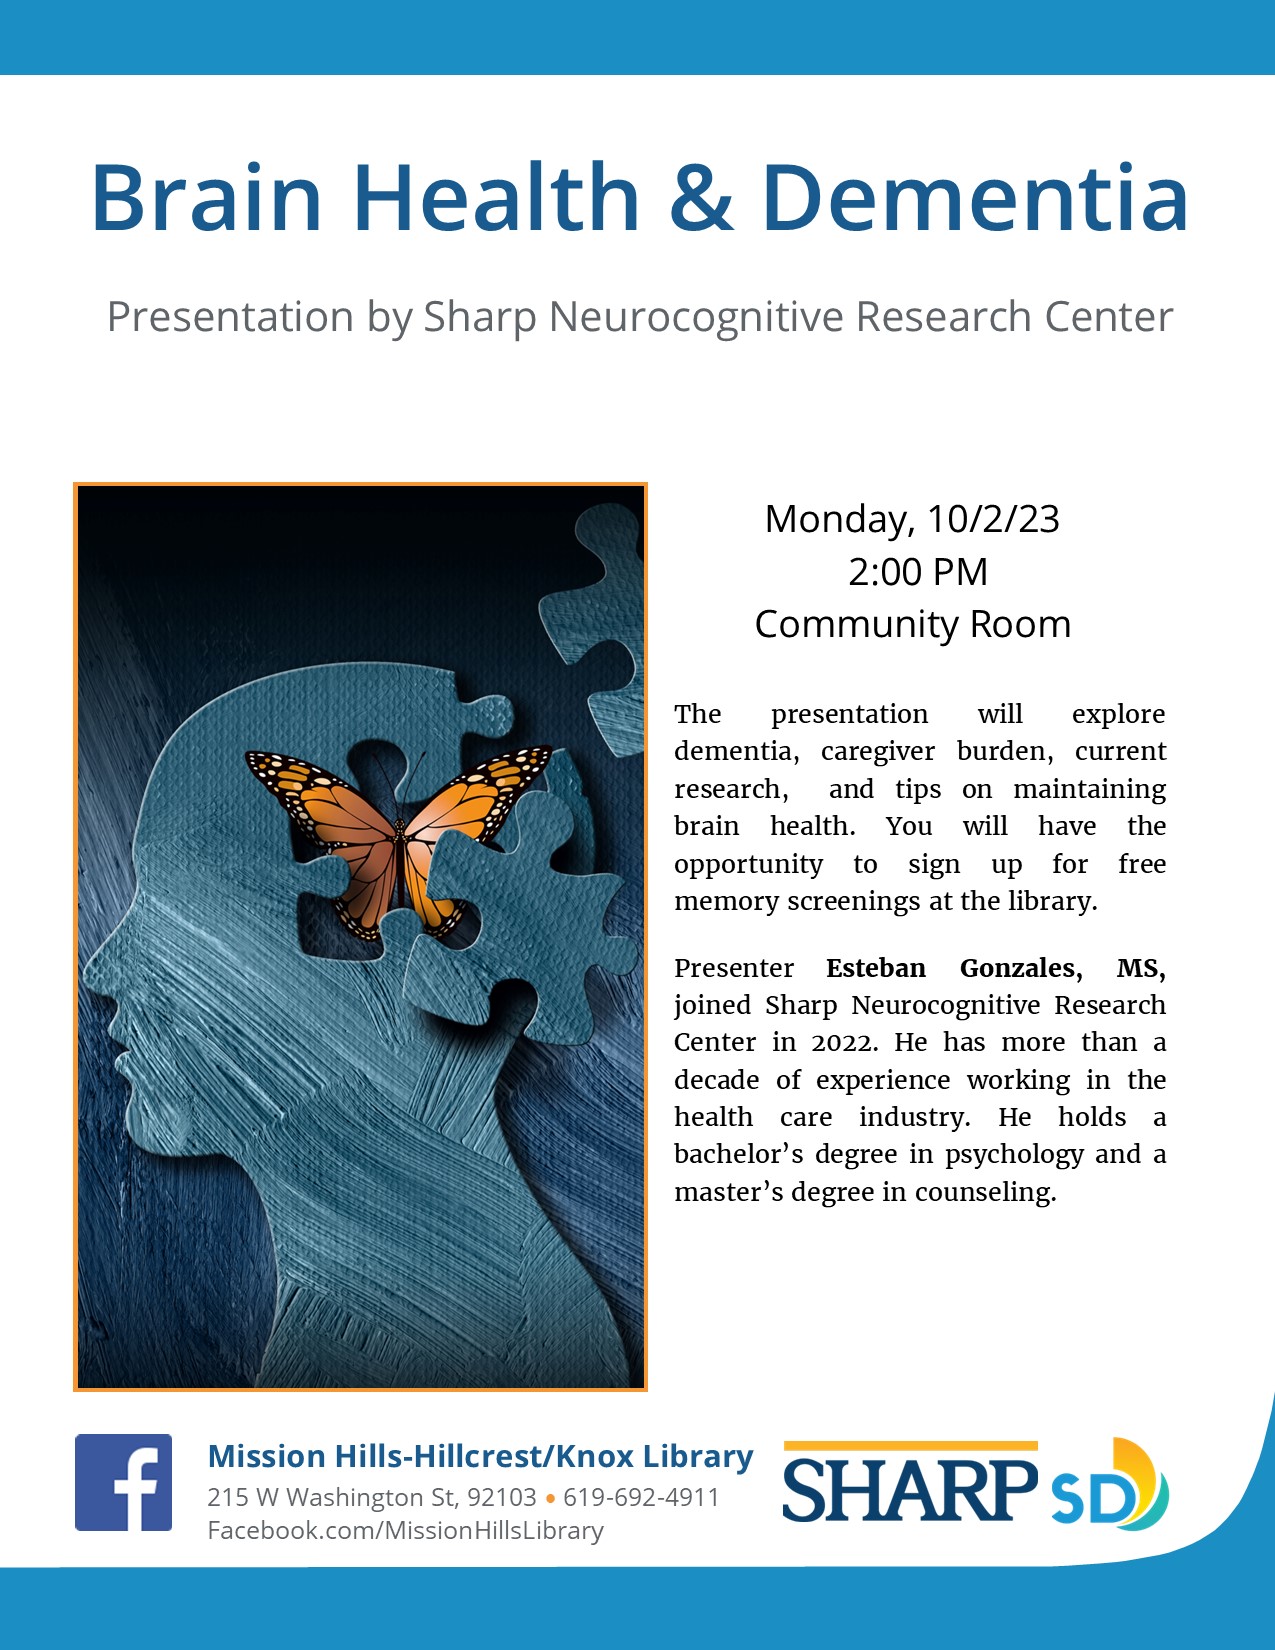 Flyer with description of program and image of head with puzzle pieces and butterfly